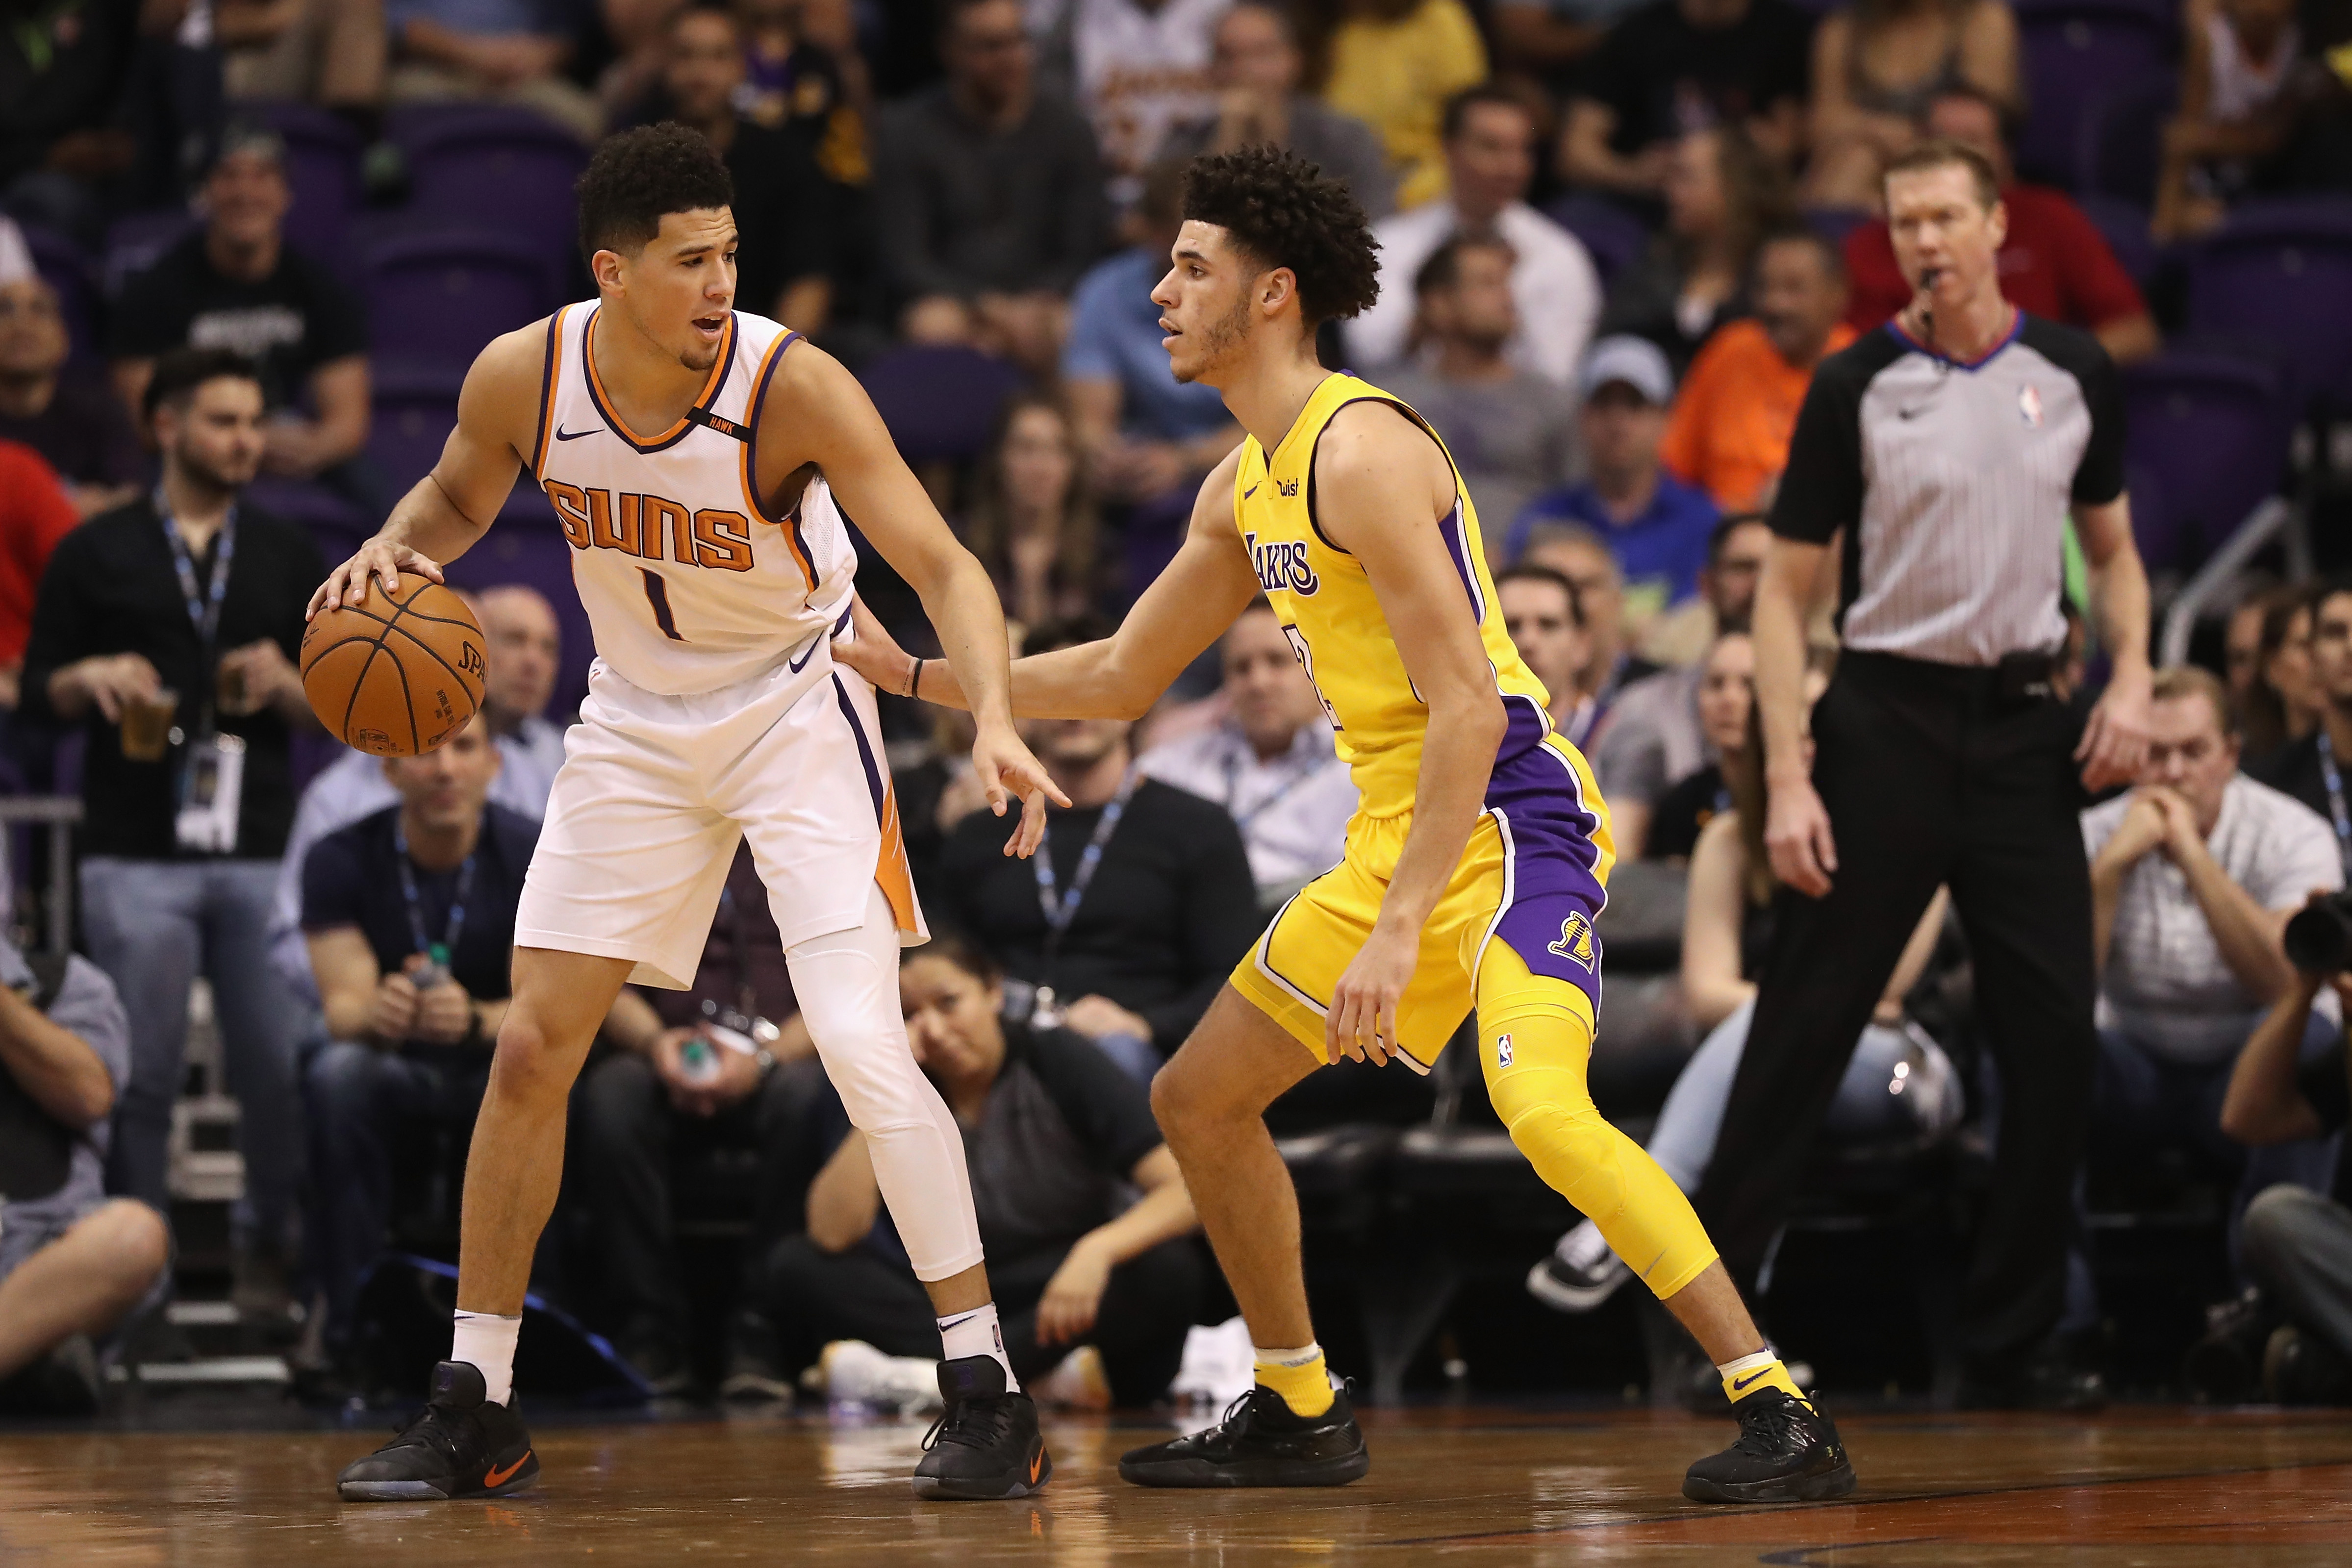 Los Angeles Lakers: Lonzo Ball is just an average NBA player